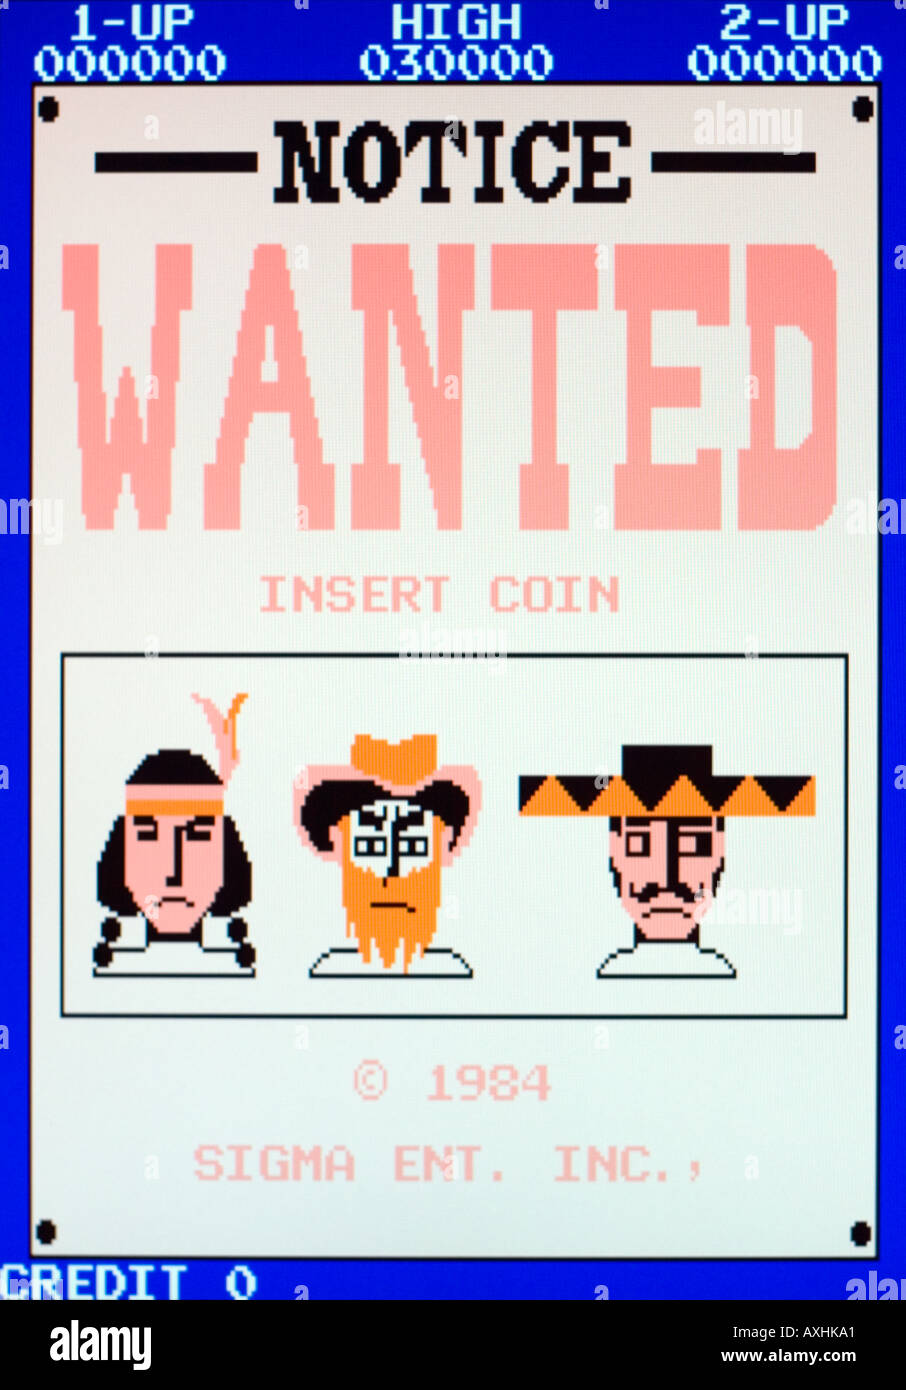 Wanted Sigma Ent Inc 1984 Vintage arcade videogame screen shot - EDITORIAL USE ONLY Stock Photo